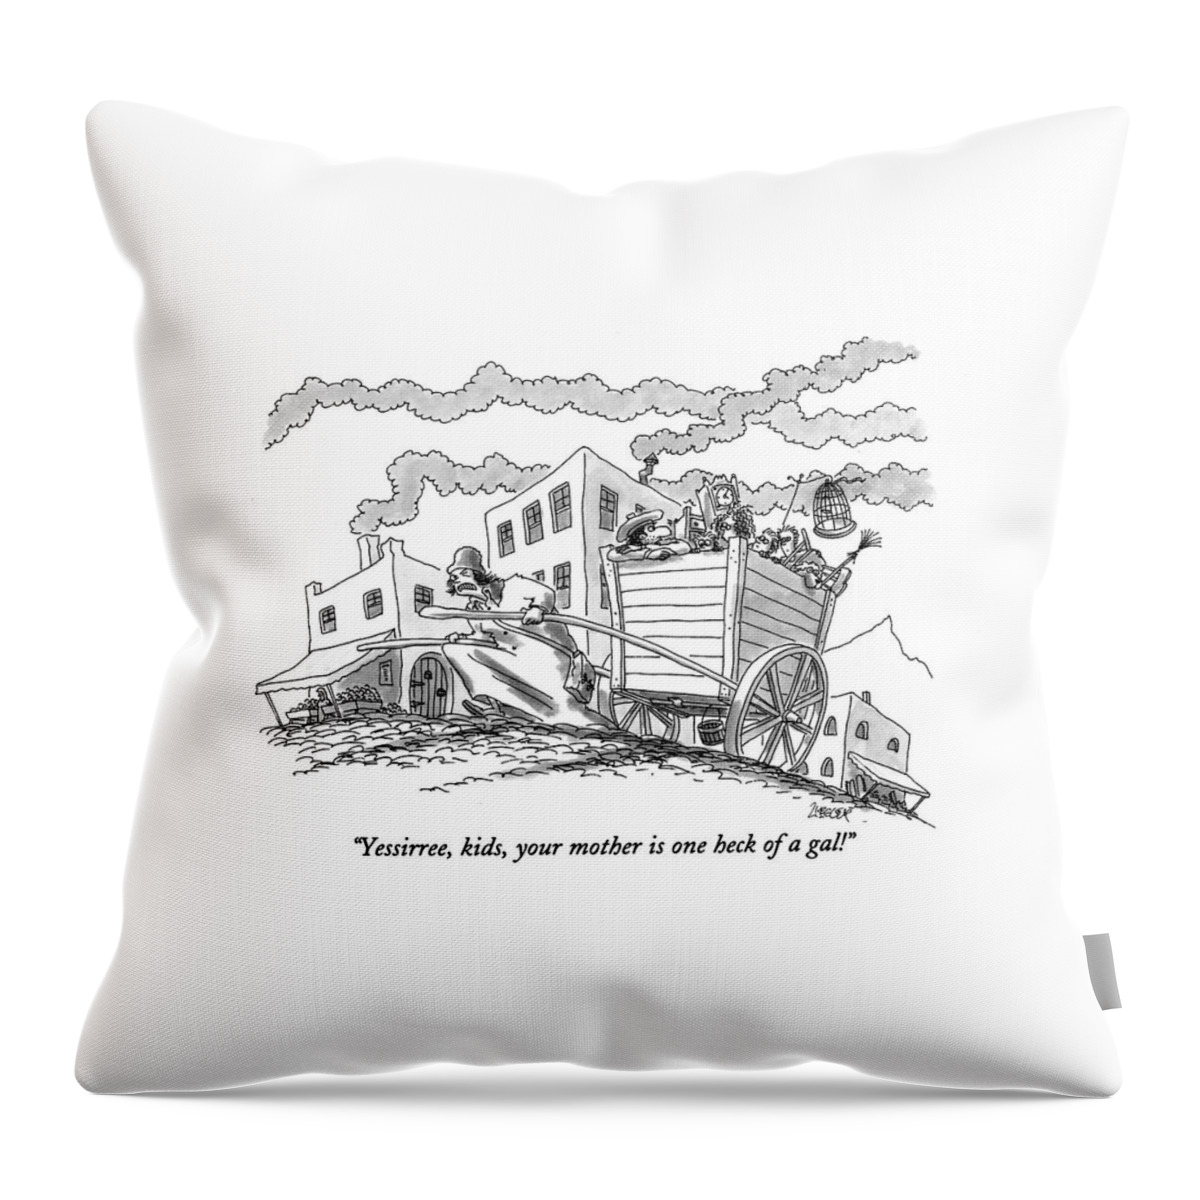 Yessirree, Kids, Your Mother Is One Heck Of A Gal! Throw Pillow